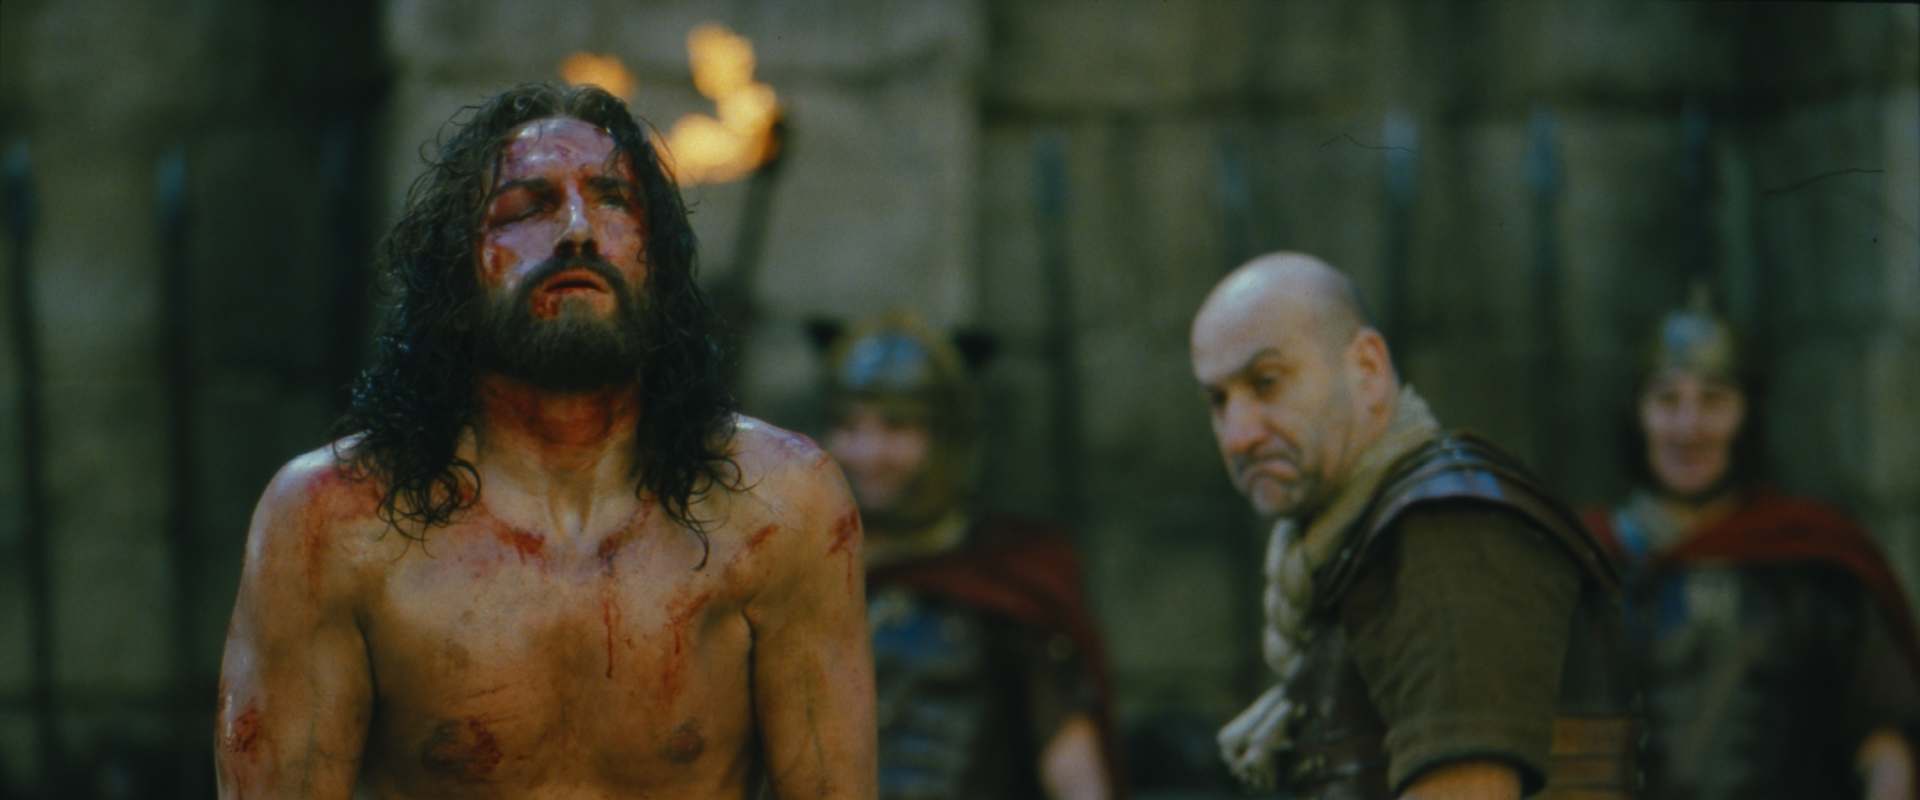 passion of christ free streaming